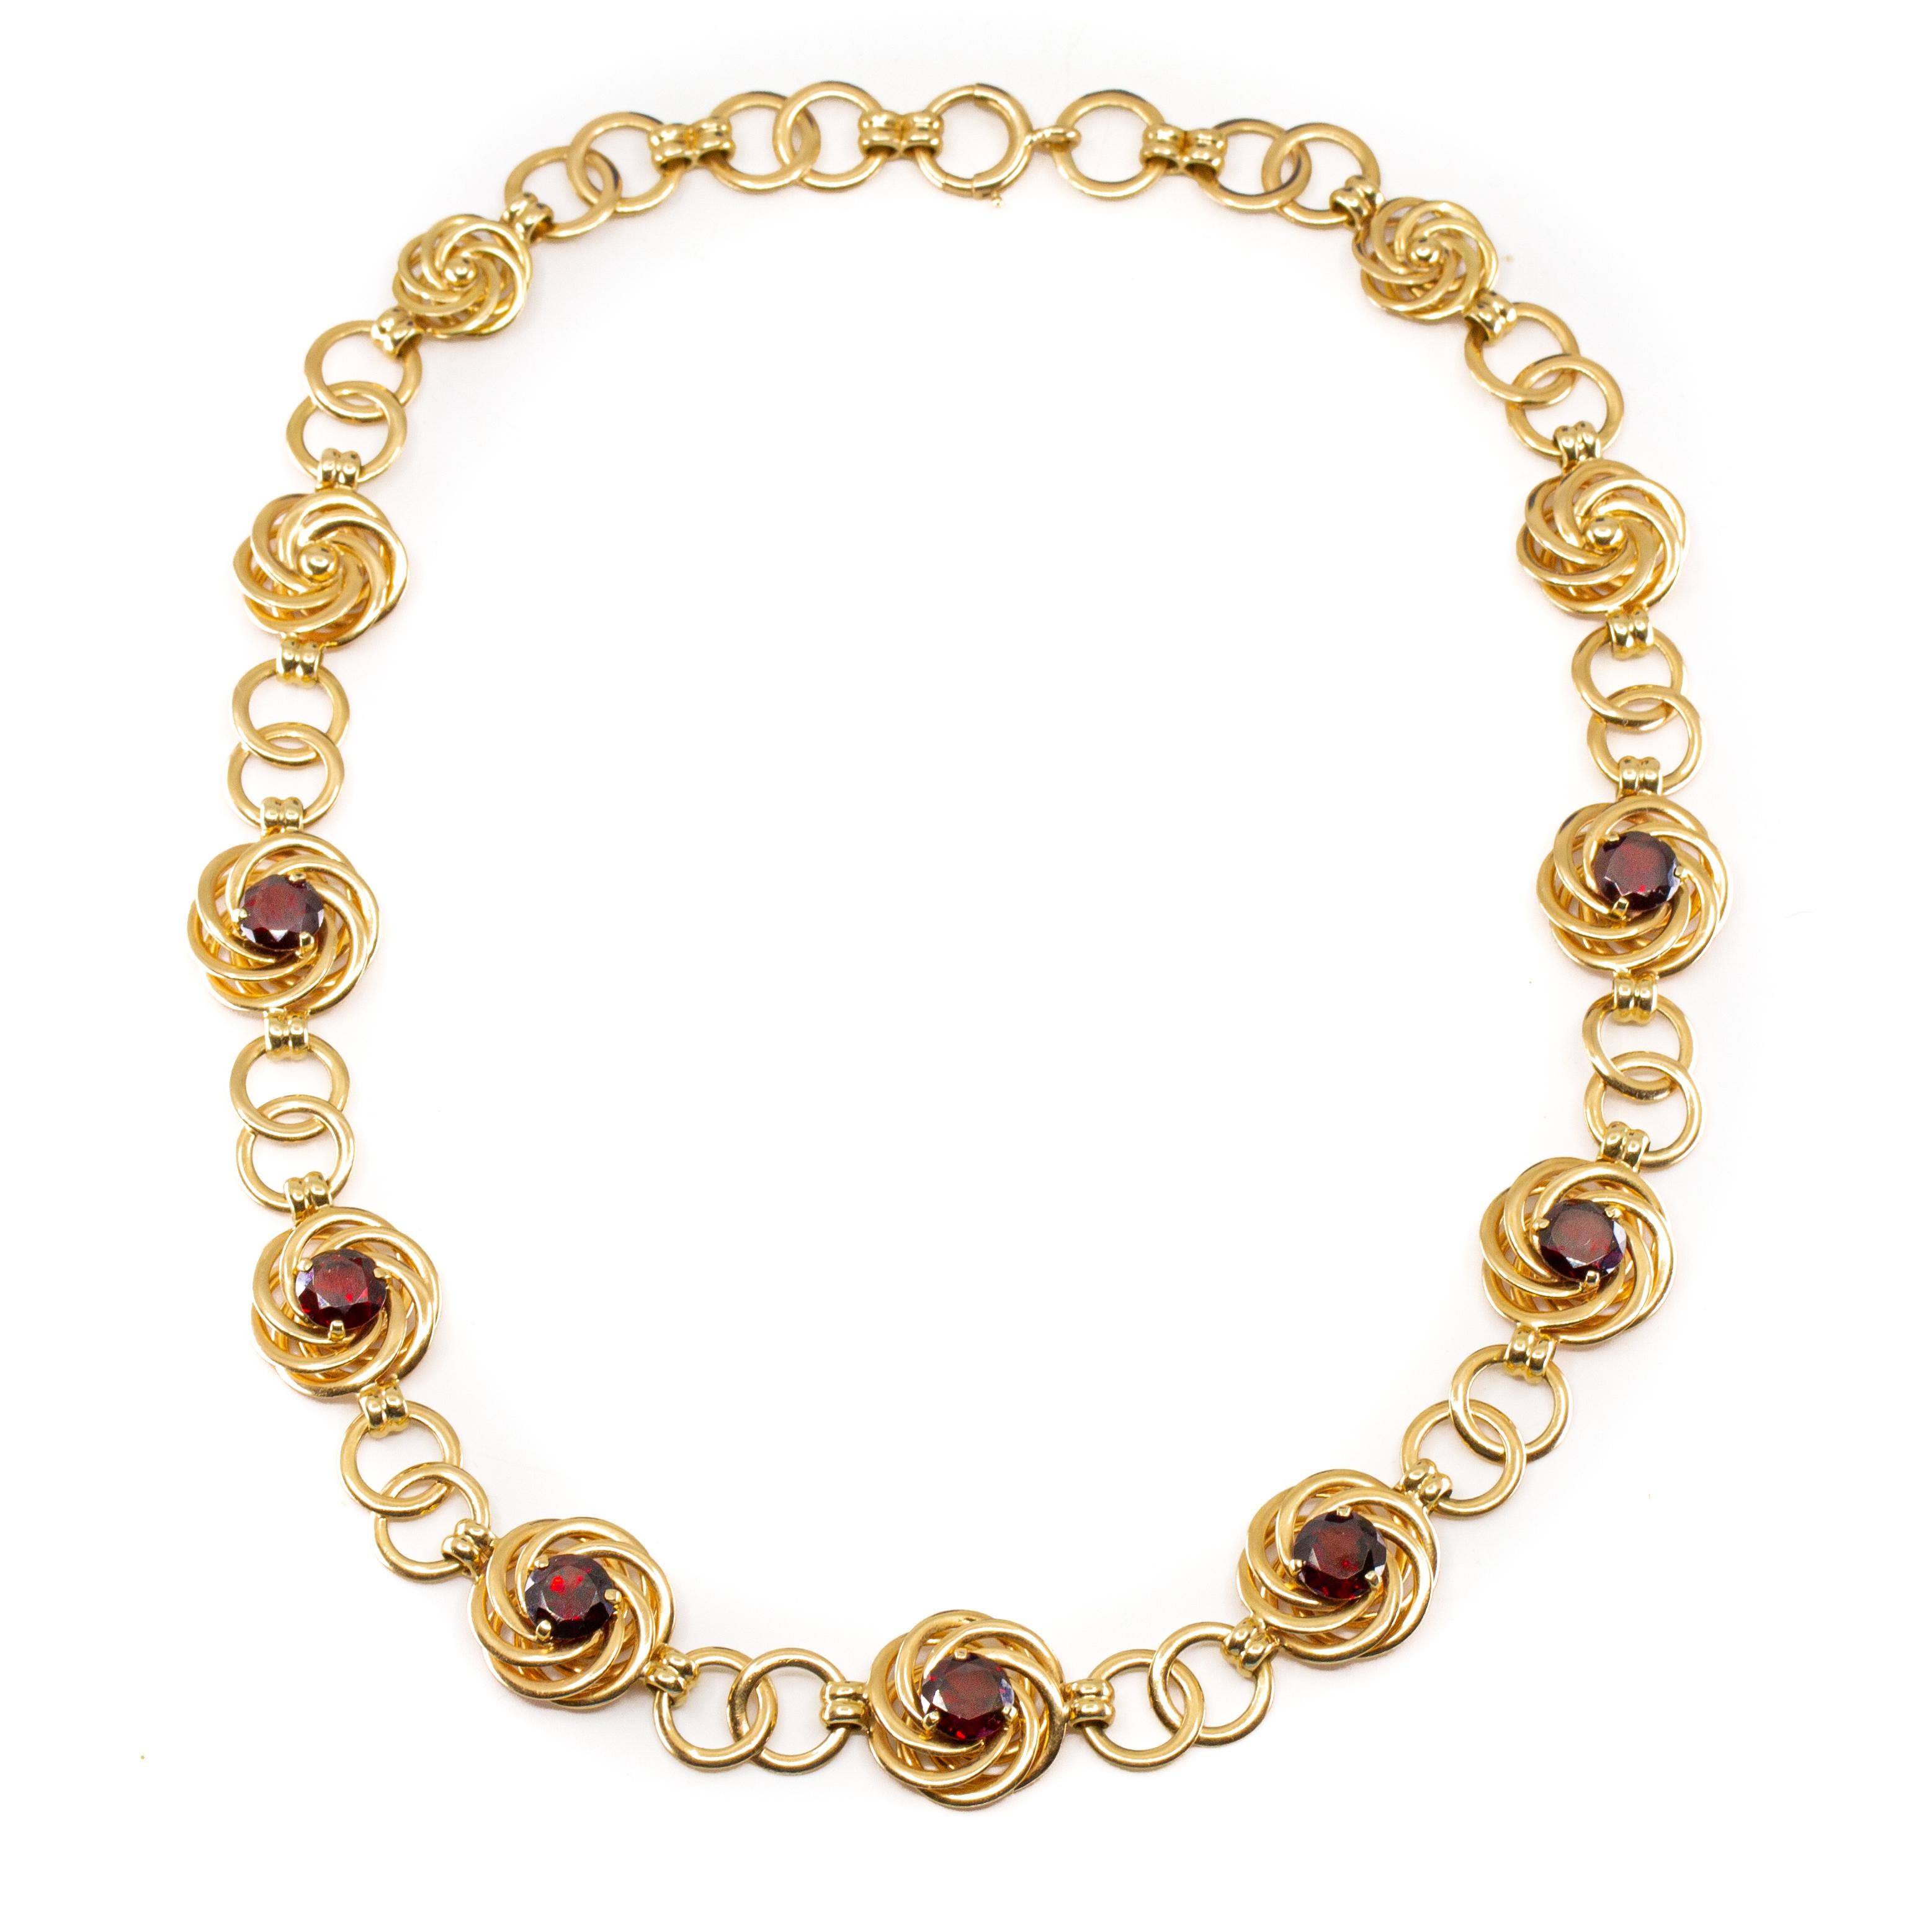 Authentic Tiffany and Co. 14kt Gold and Garnet Necklace, Circa 1960 2